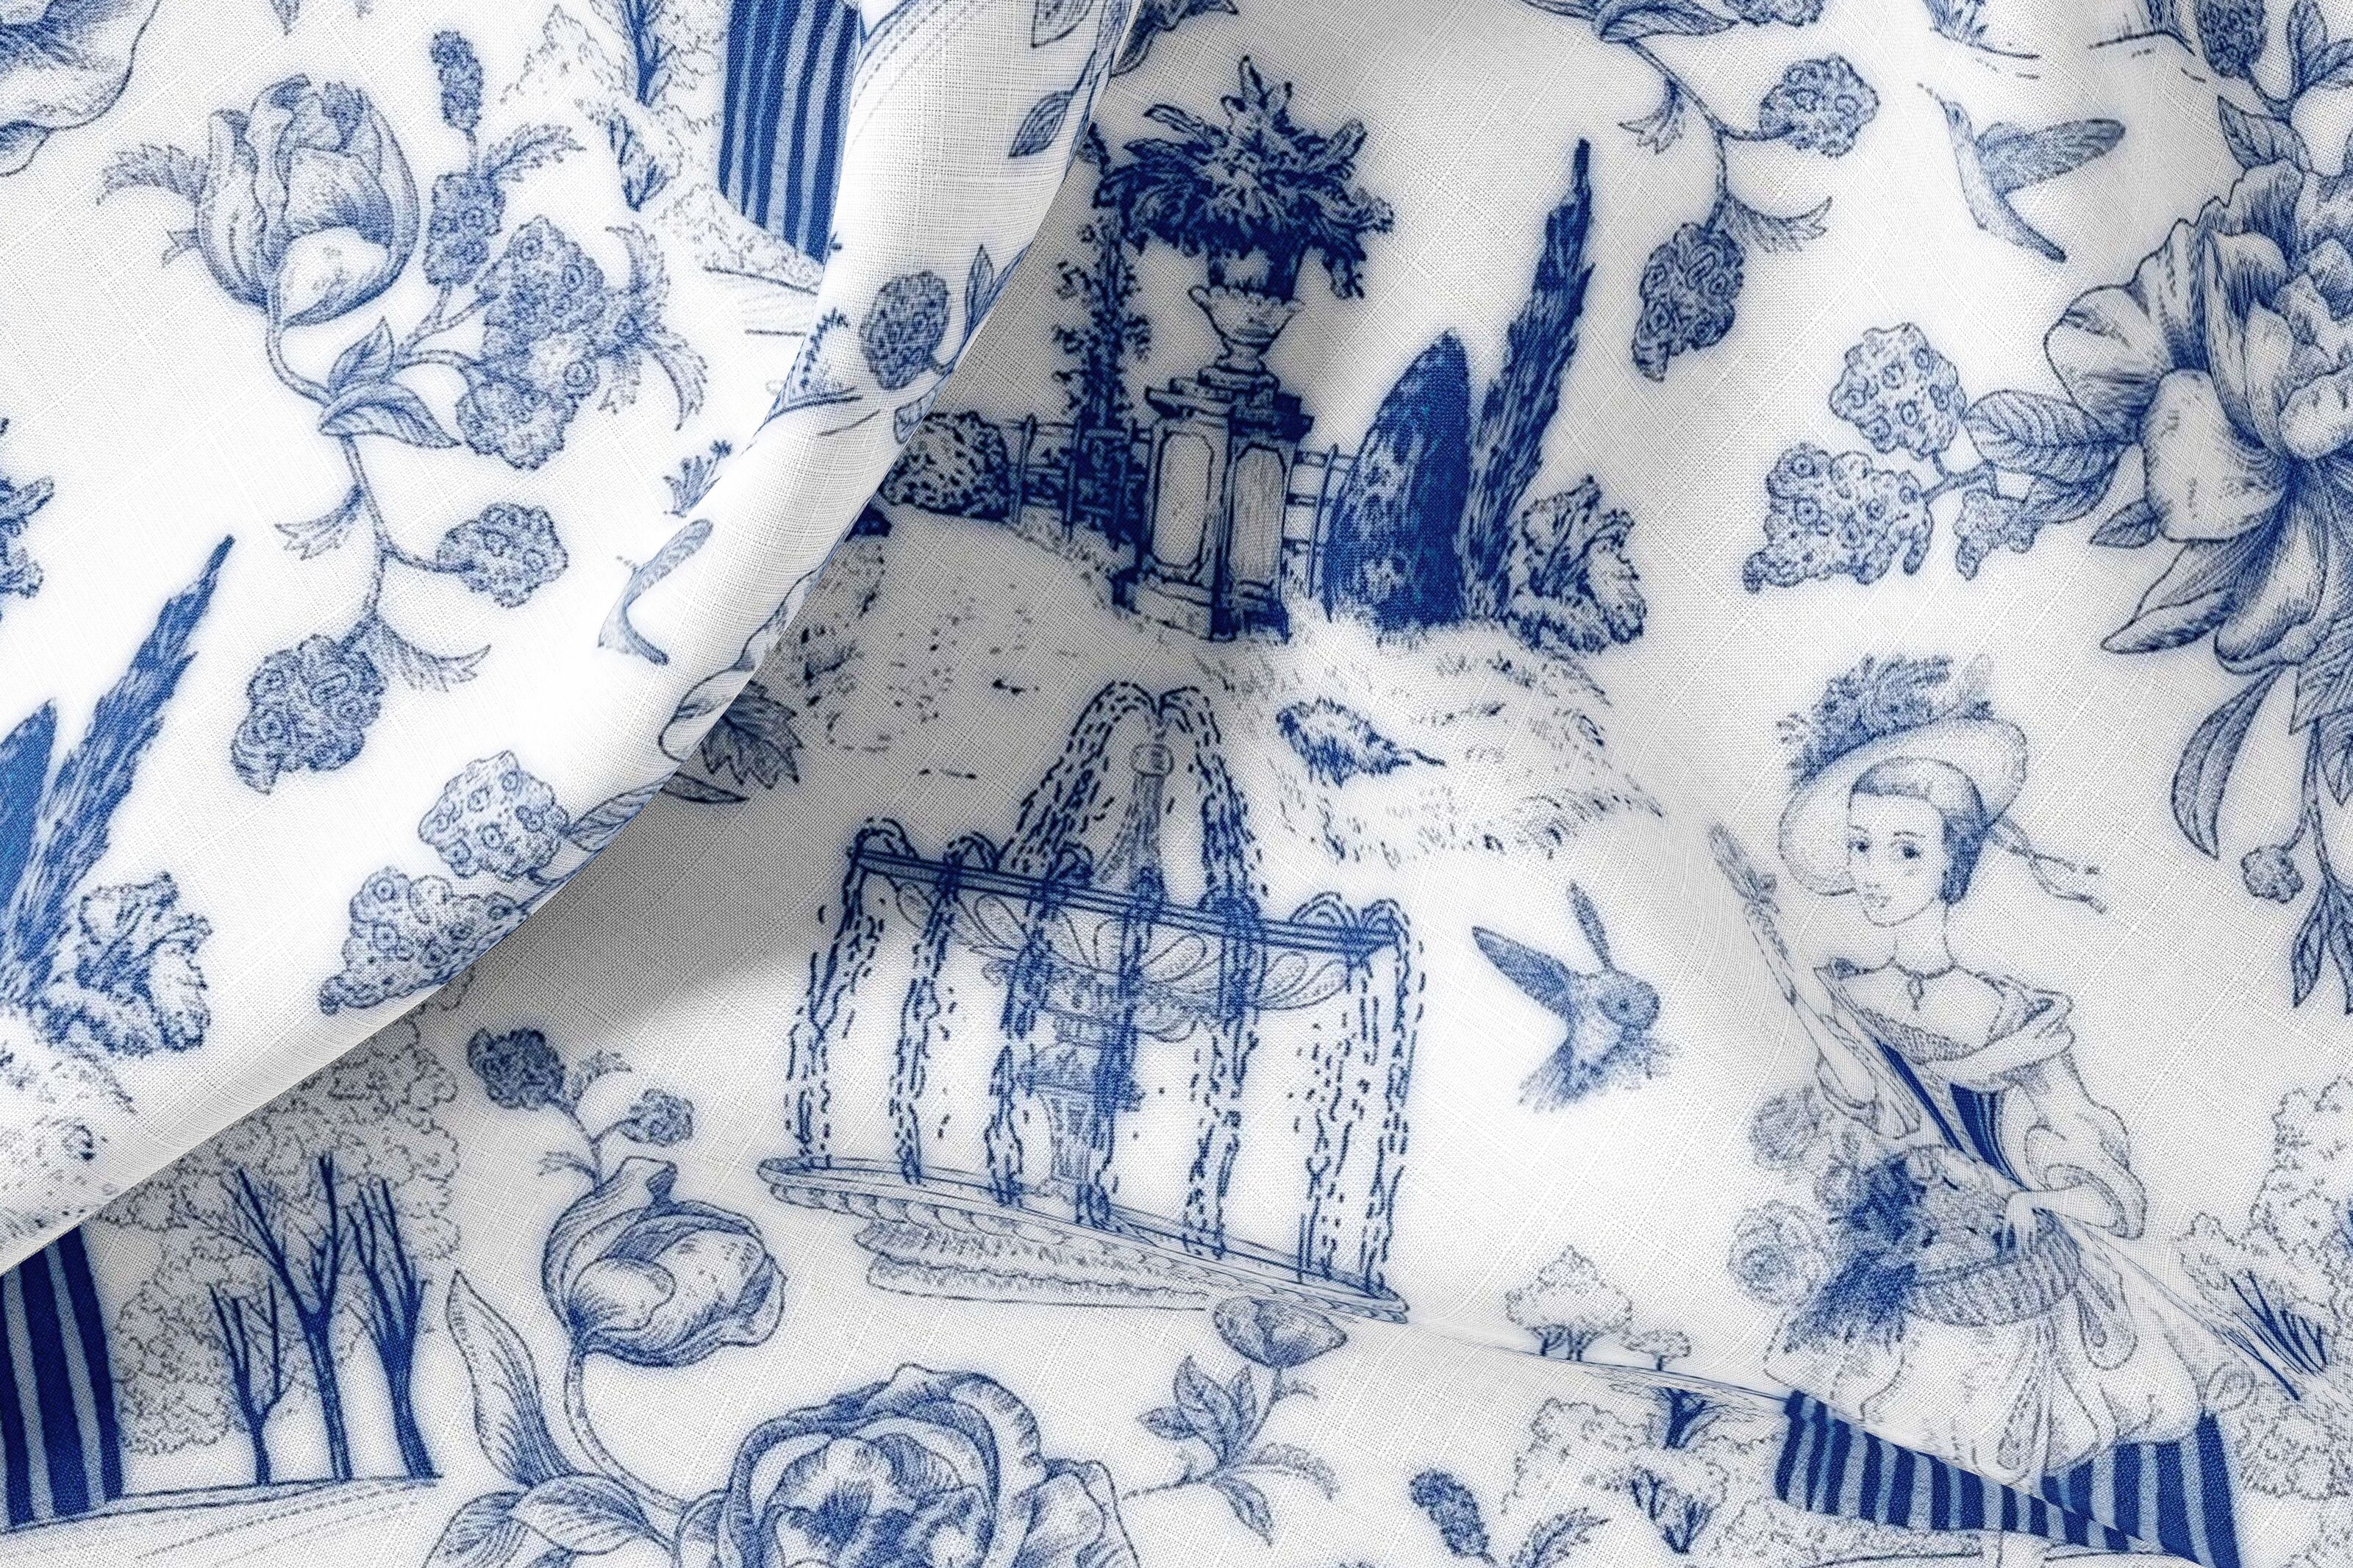 Buy wholesale Linen By The Yard or Meter, Vintage French Toile de Jouy  Print Linen Fabric For Bedding, Curtains, Dresses, Clothing, Table Cloth &  Pillow Covers